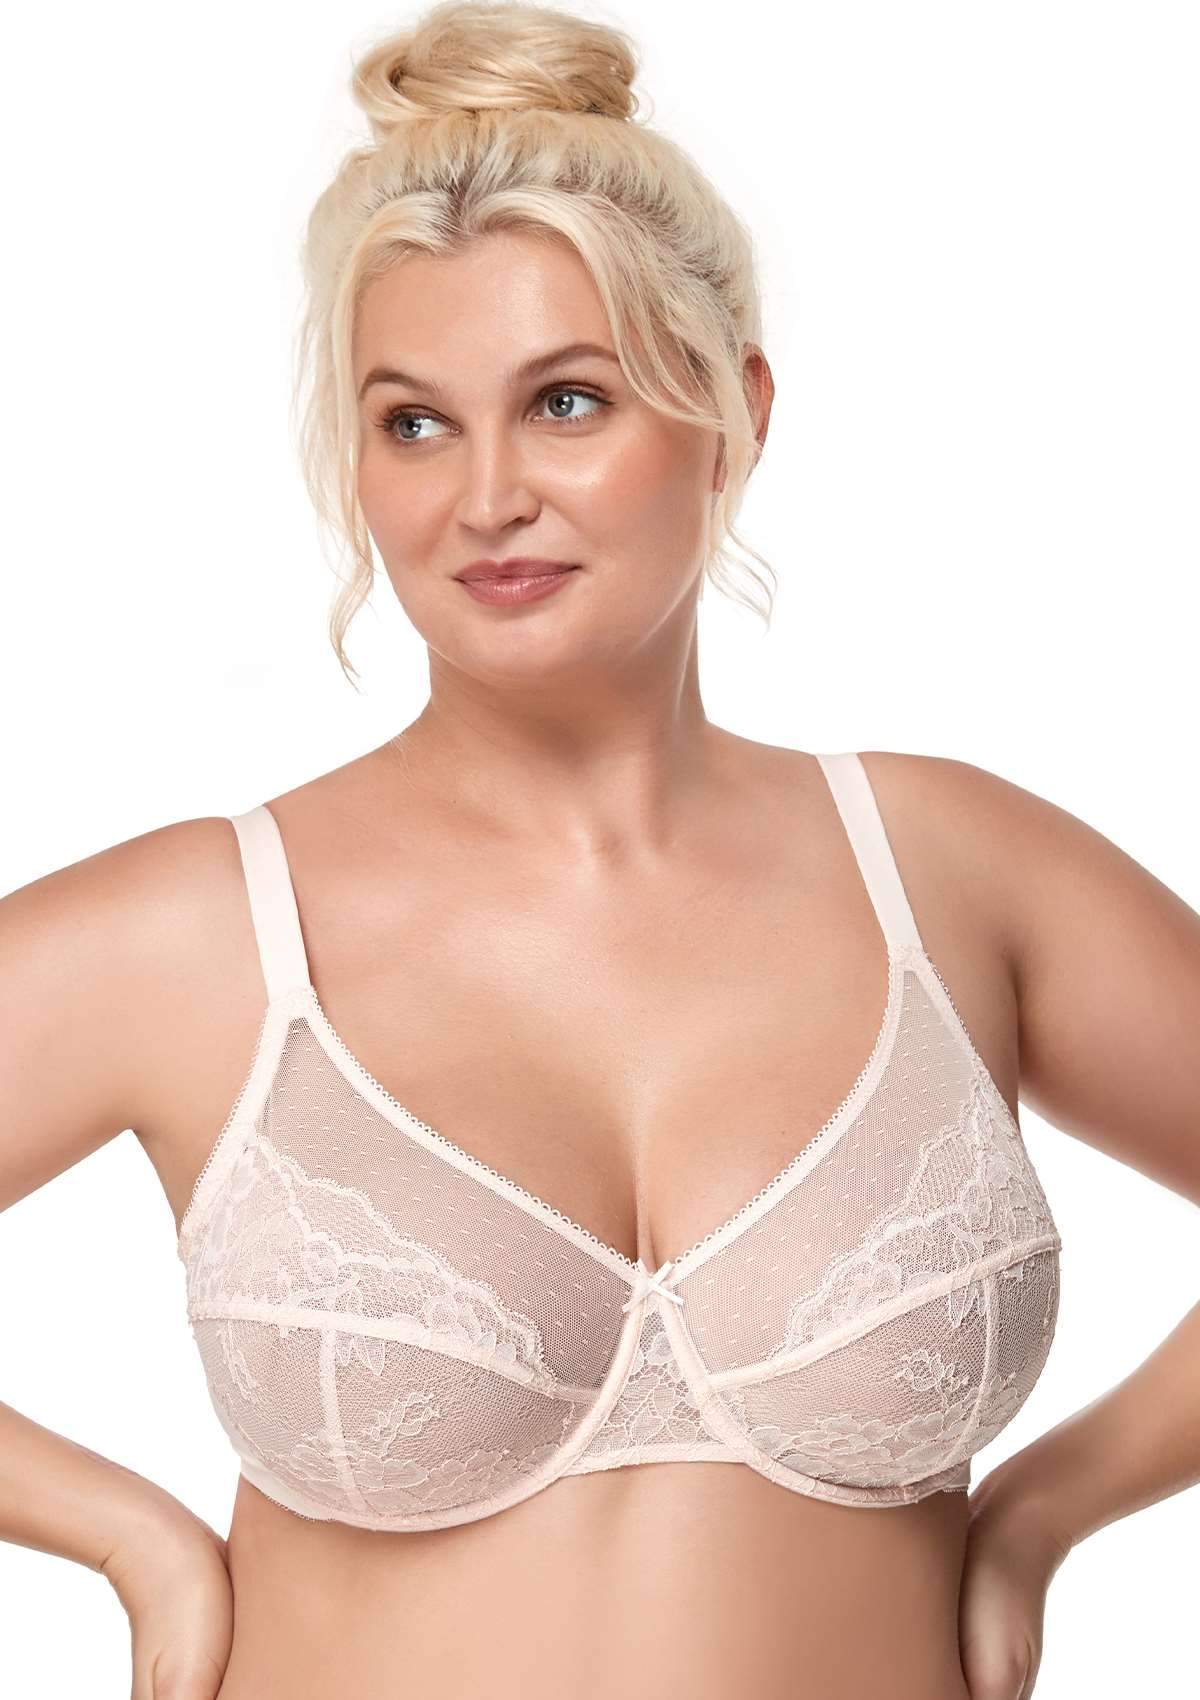 HSIA Enchante Lacy Bra: Comfy Sheer Lace Bra With Lift - Dusty Peach / 44 / C